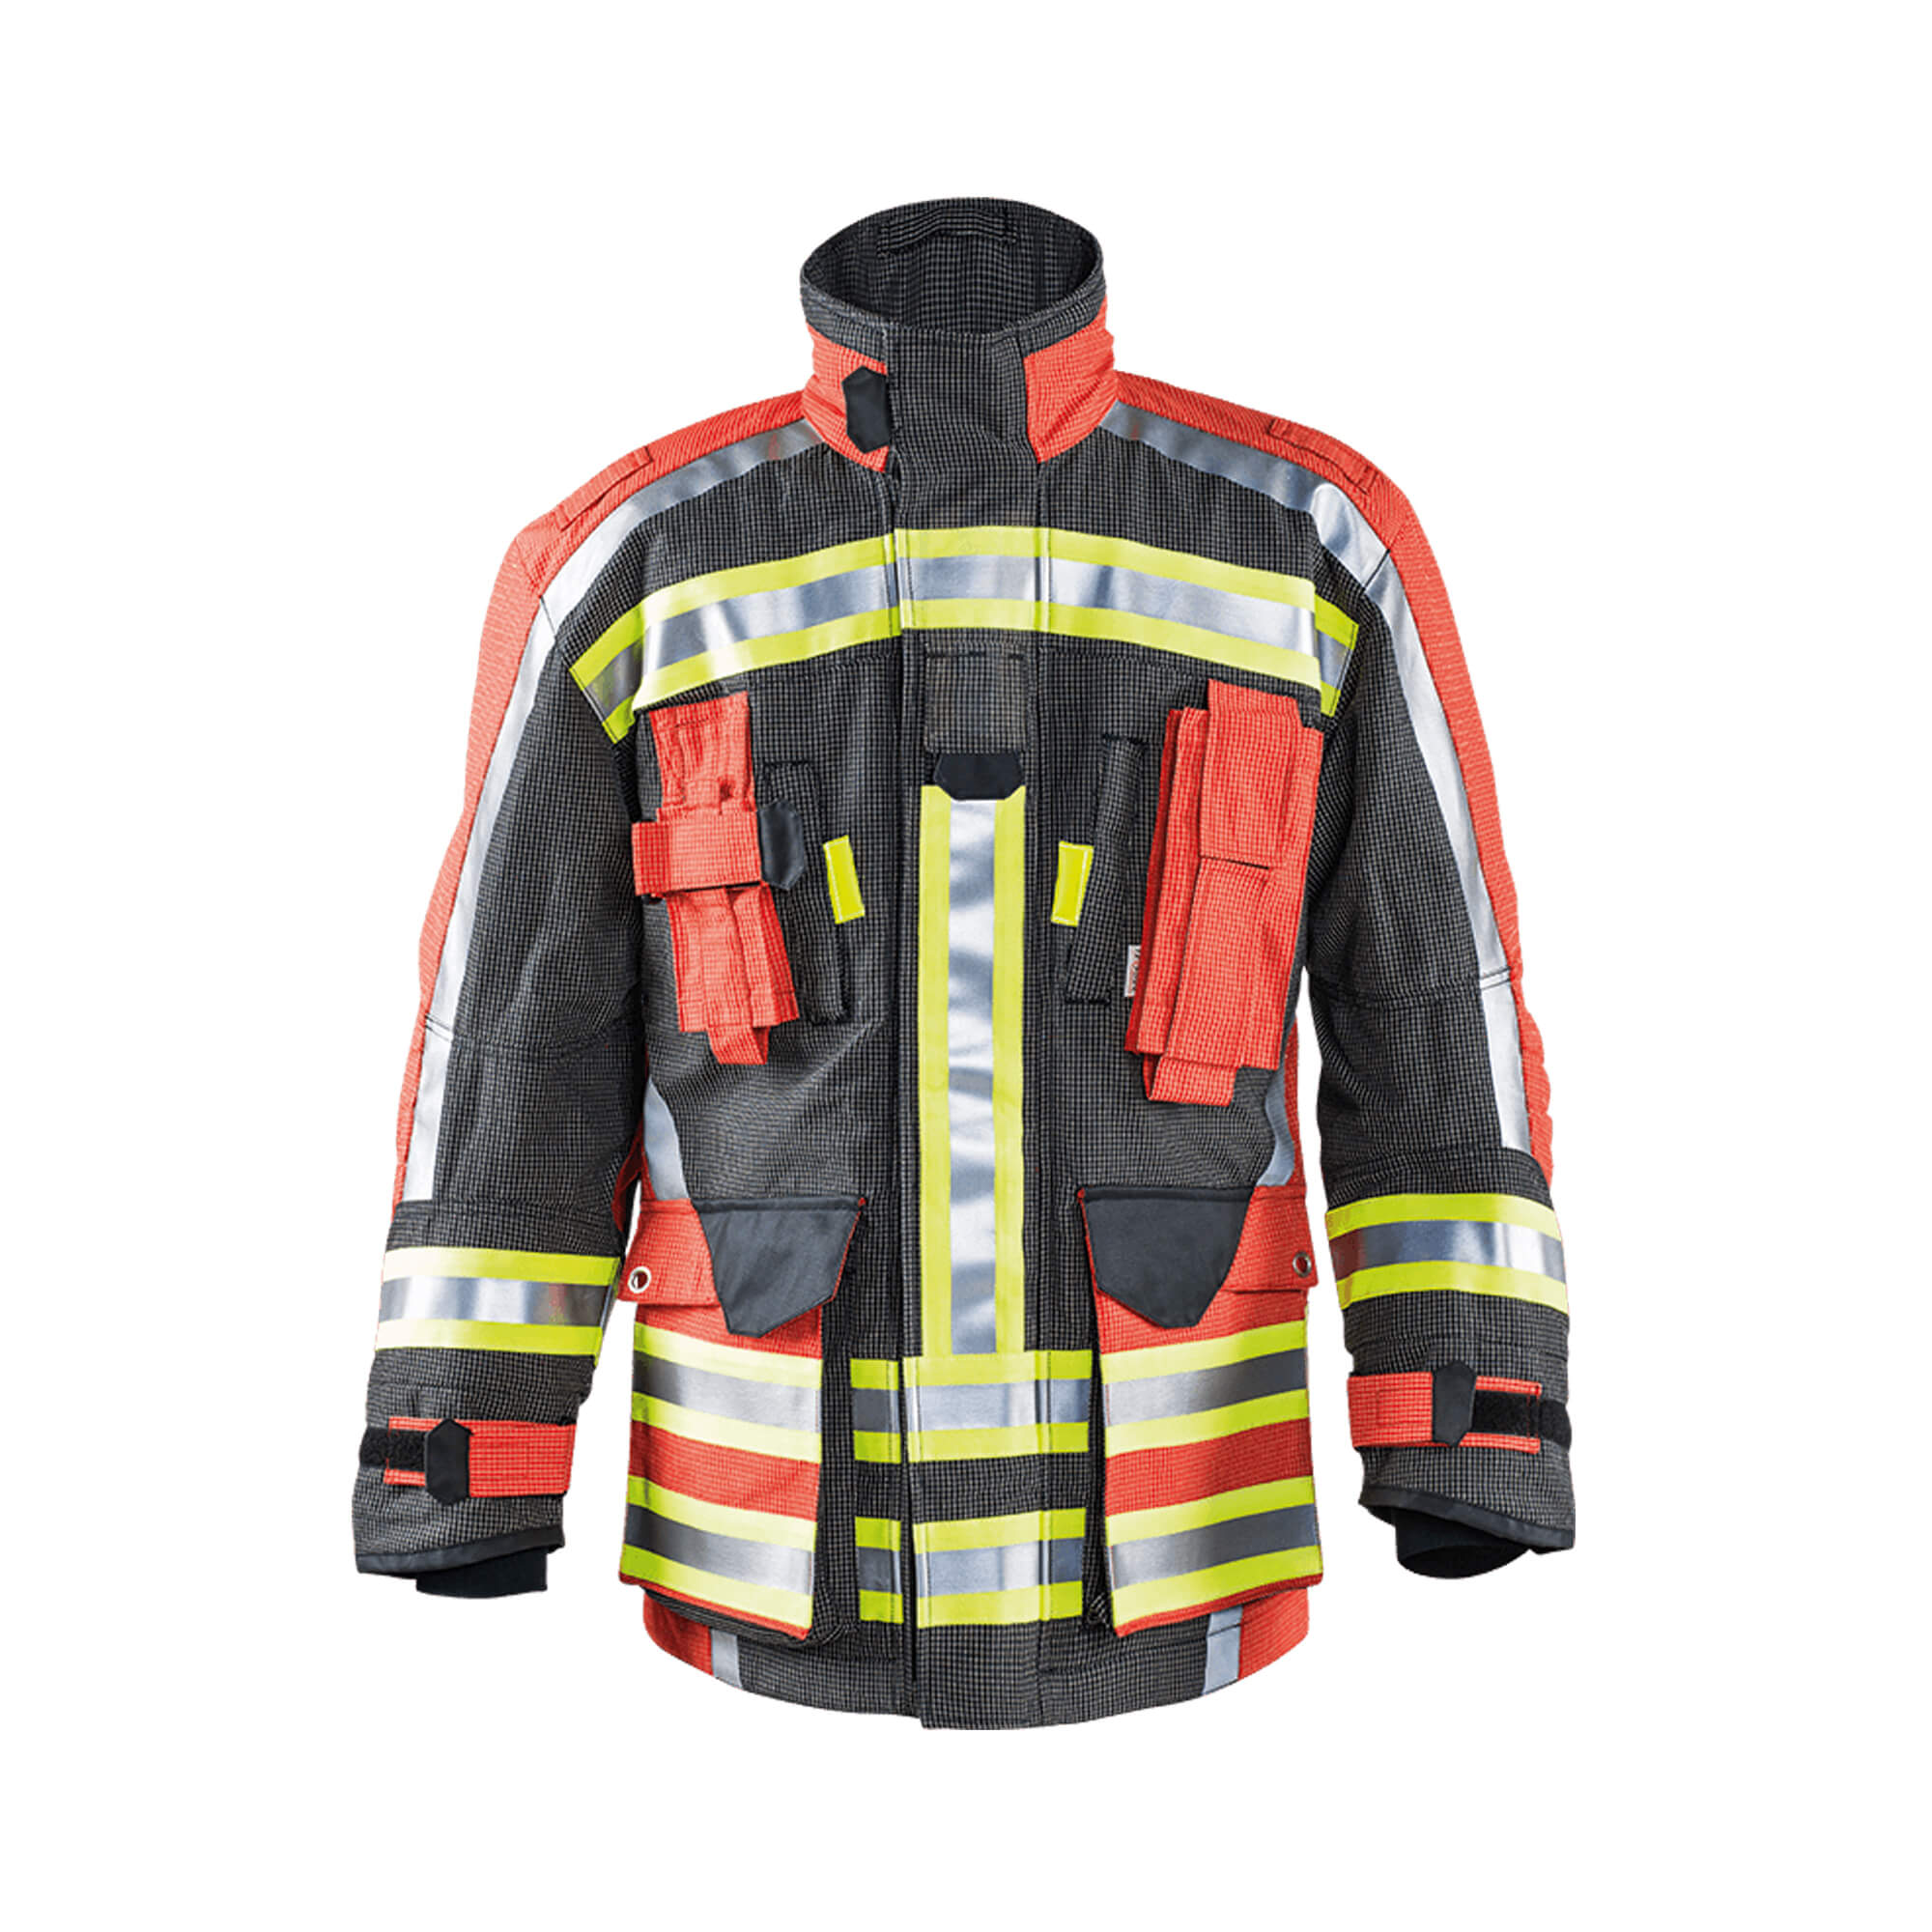 firefighter protective clothing,firefighters,firefighting equipment,zagreb,firefighter...